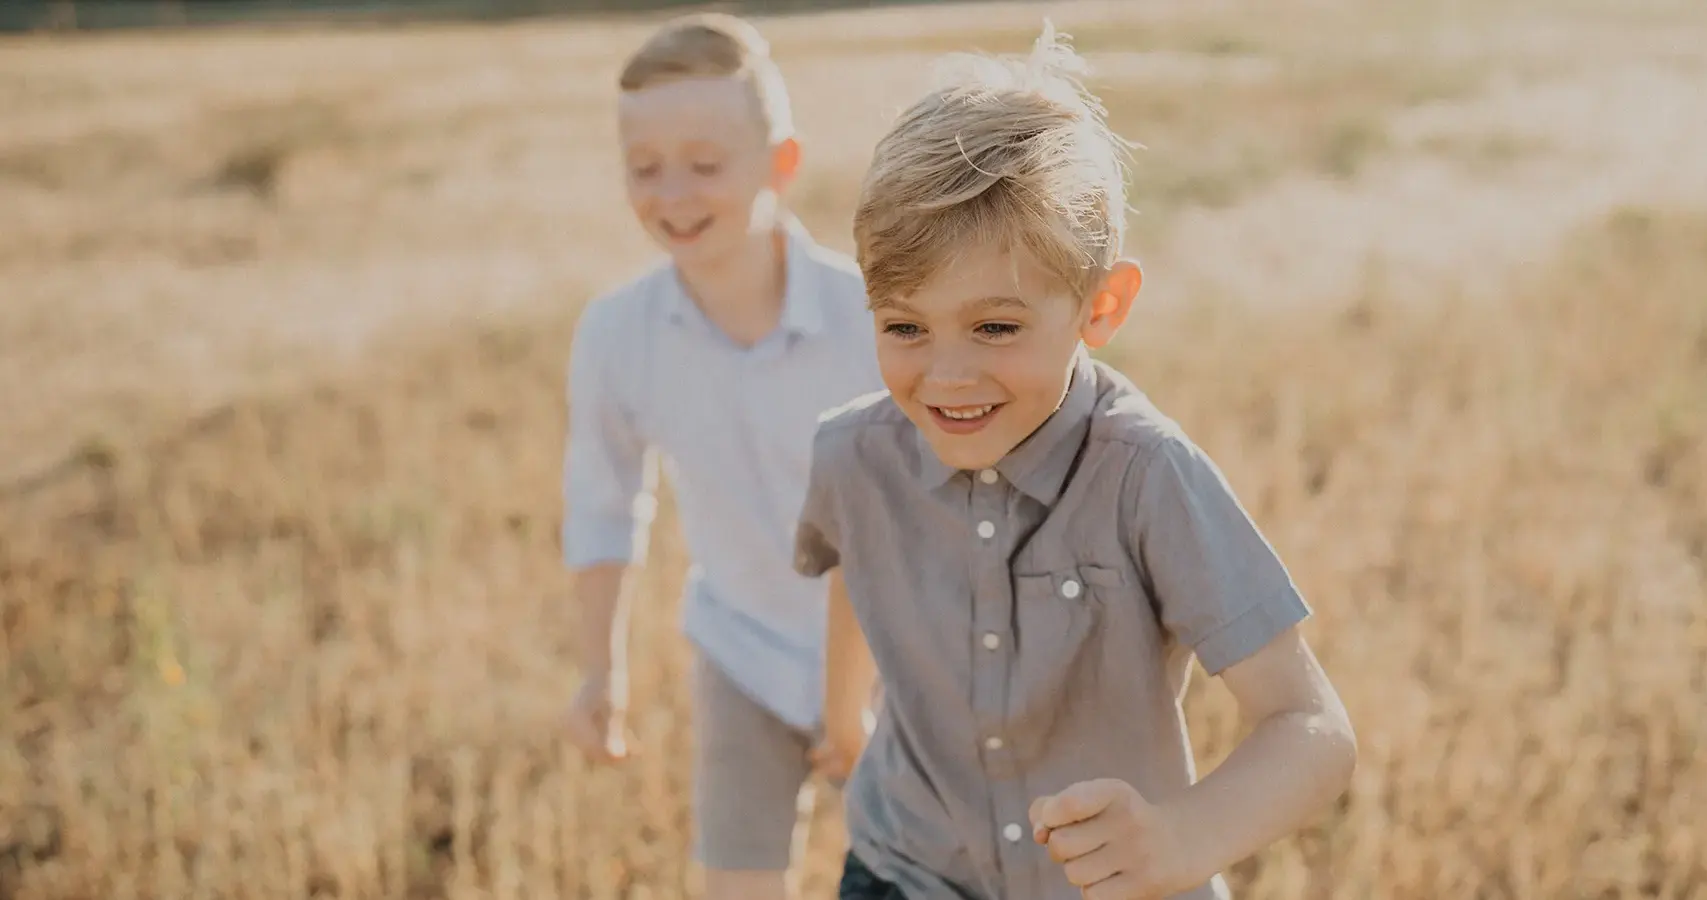 brothers smiling and running in a field | Jennifer Ginn Photography